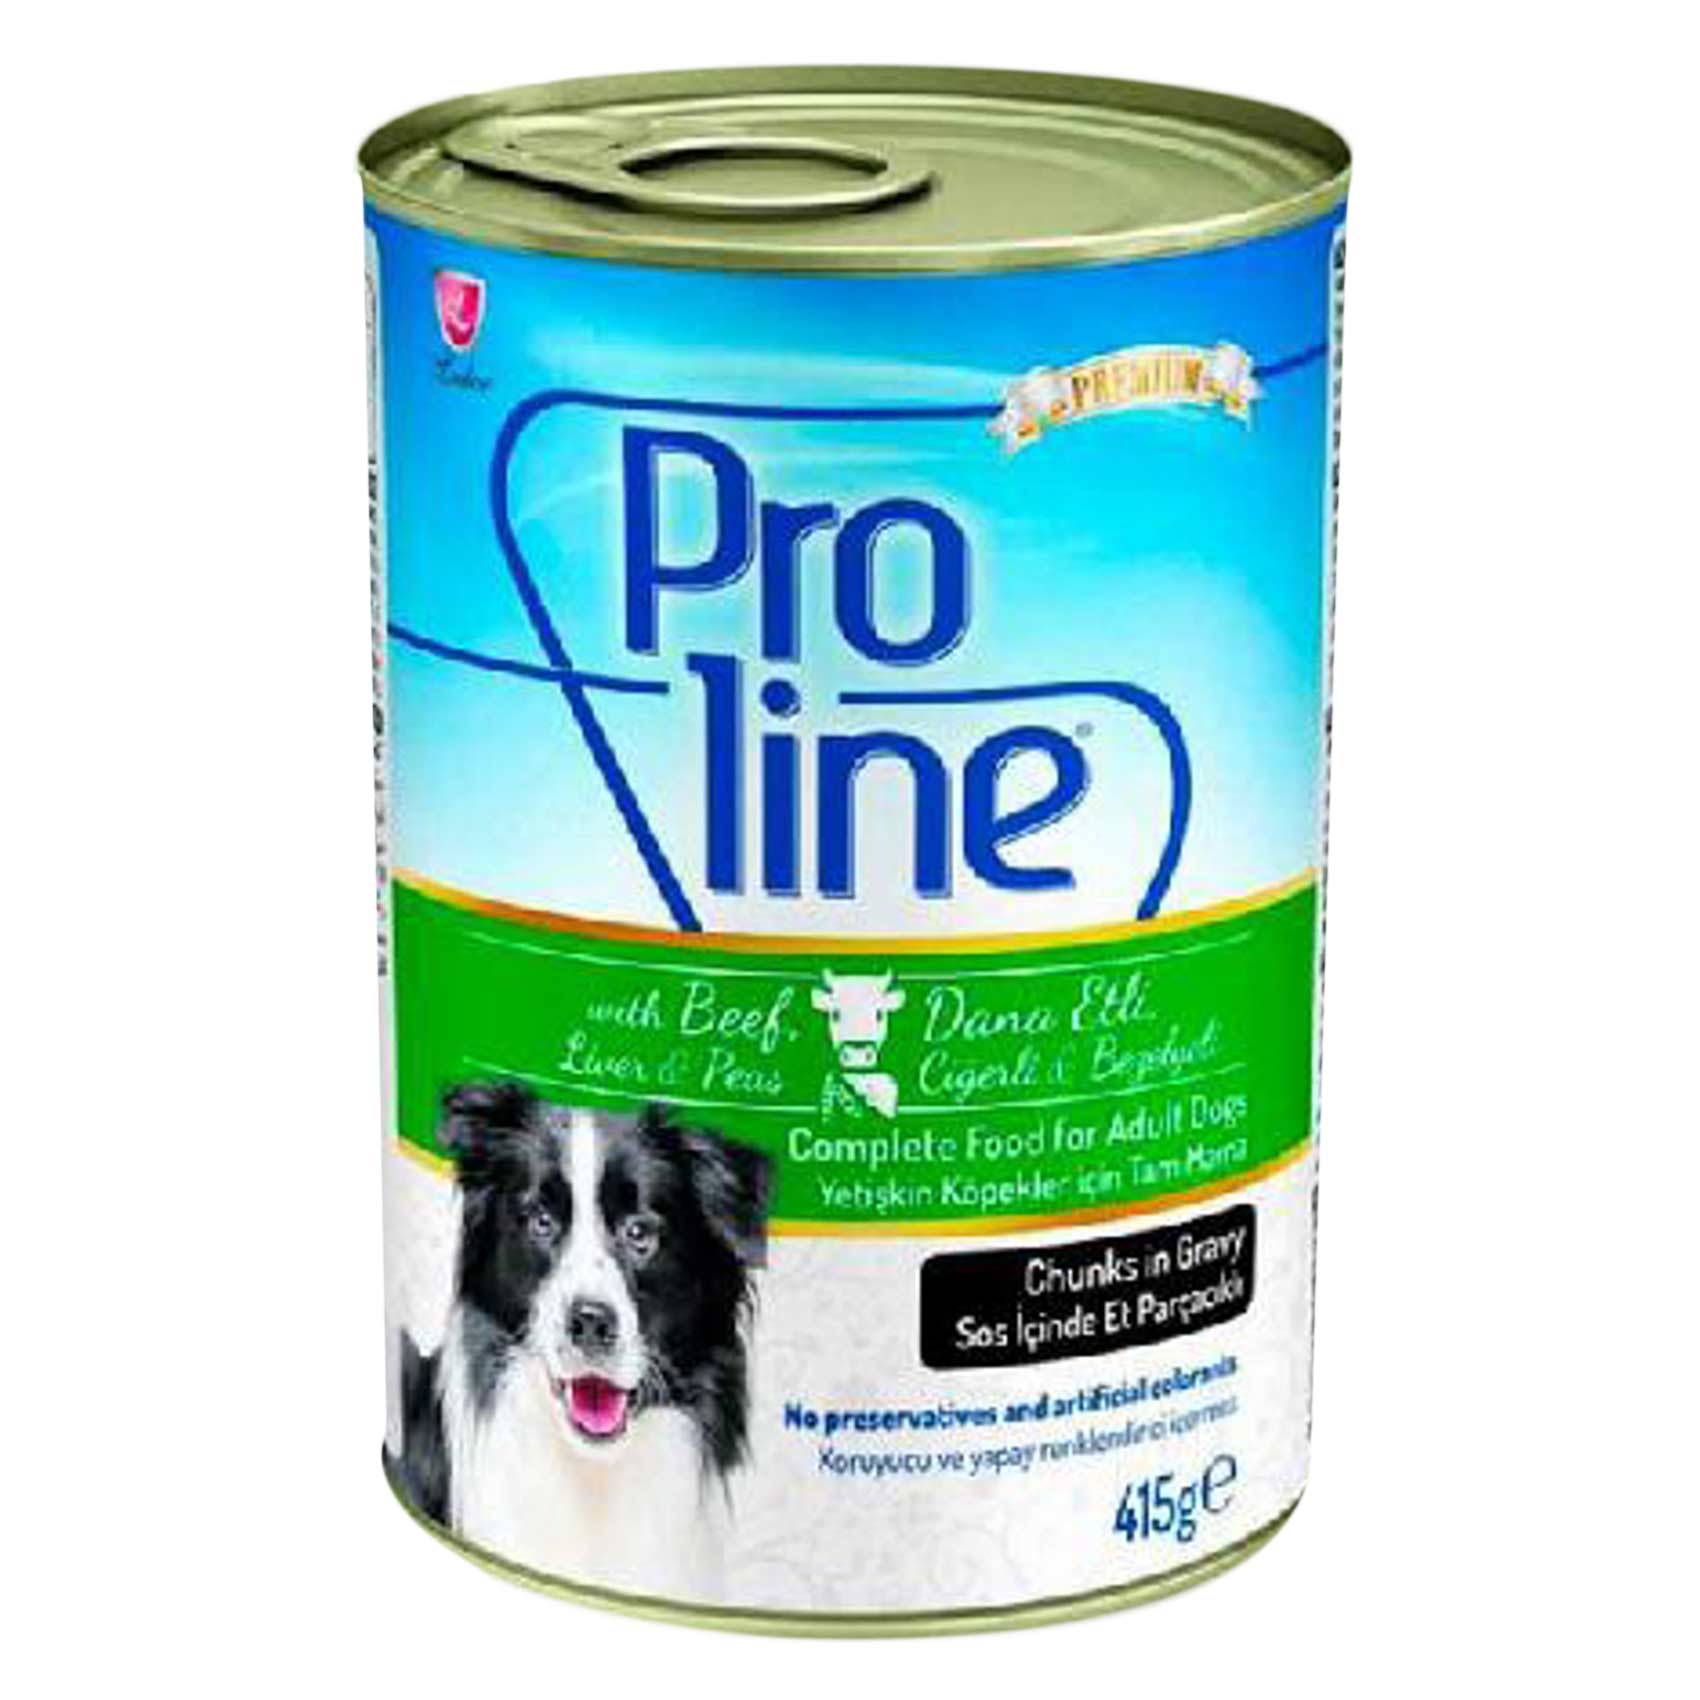 Proline Canned Beef Liver And Peas Adult Dog Food 415g